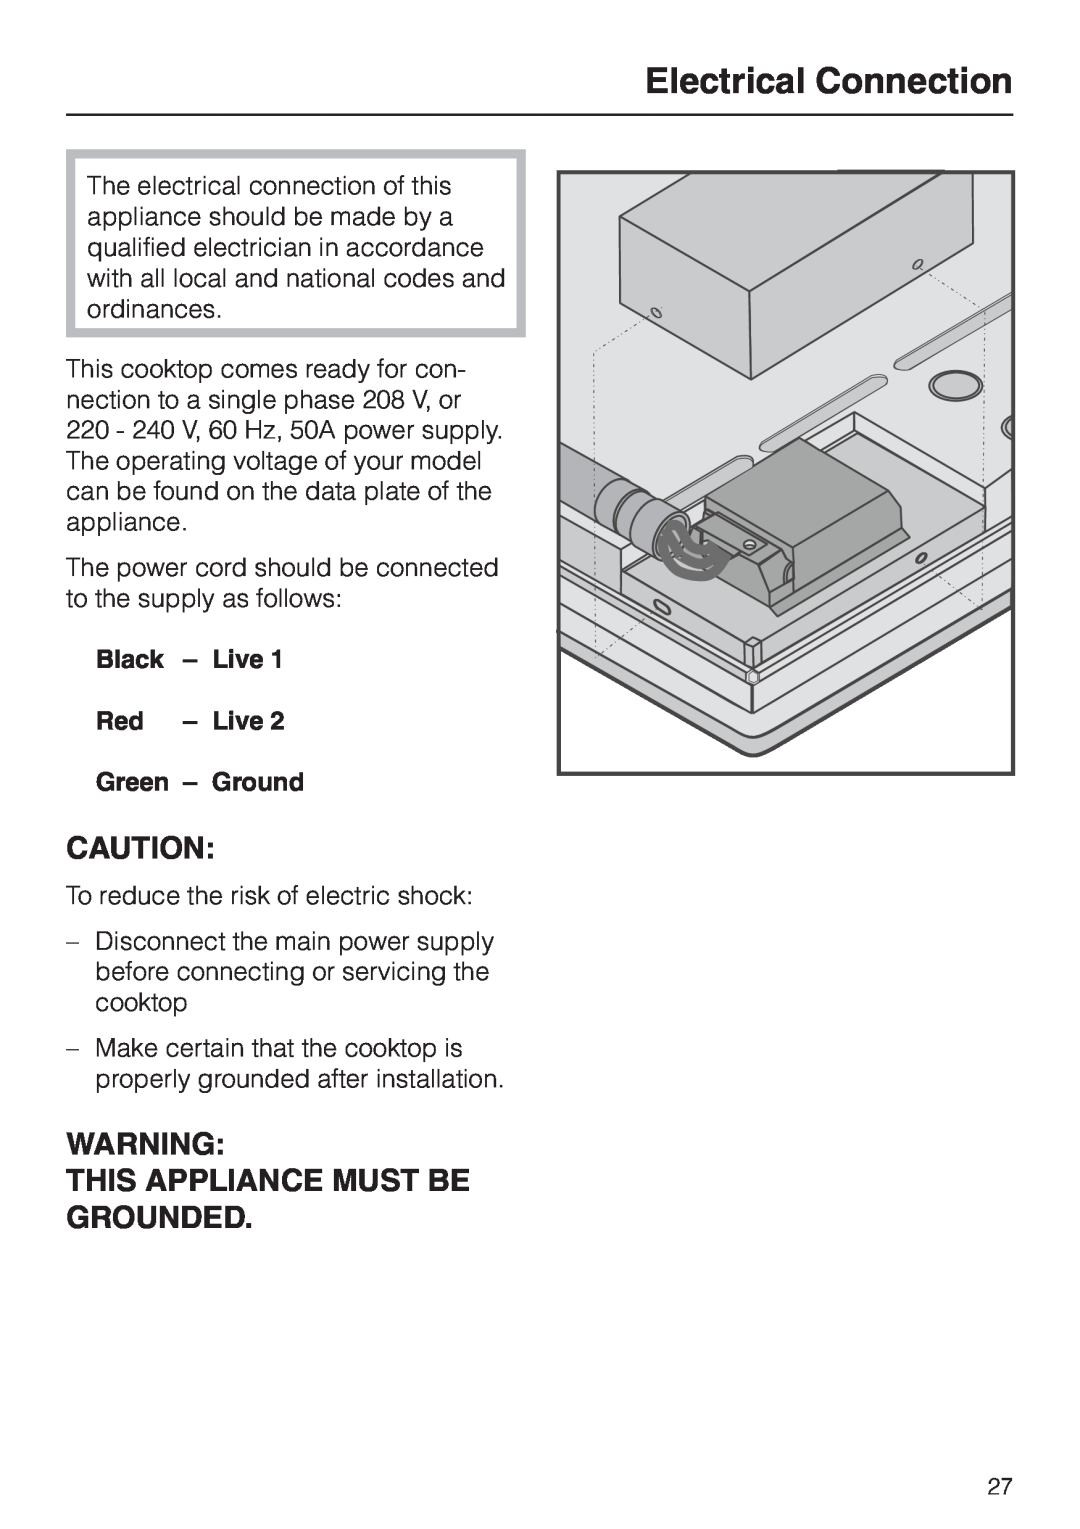 Miele KM 443 operating instructions Electrical Connection, This Appliance Must Be Grounded 